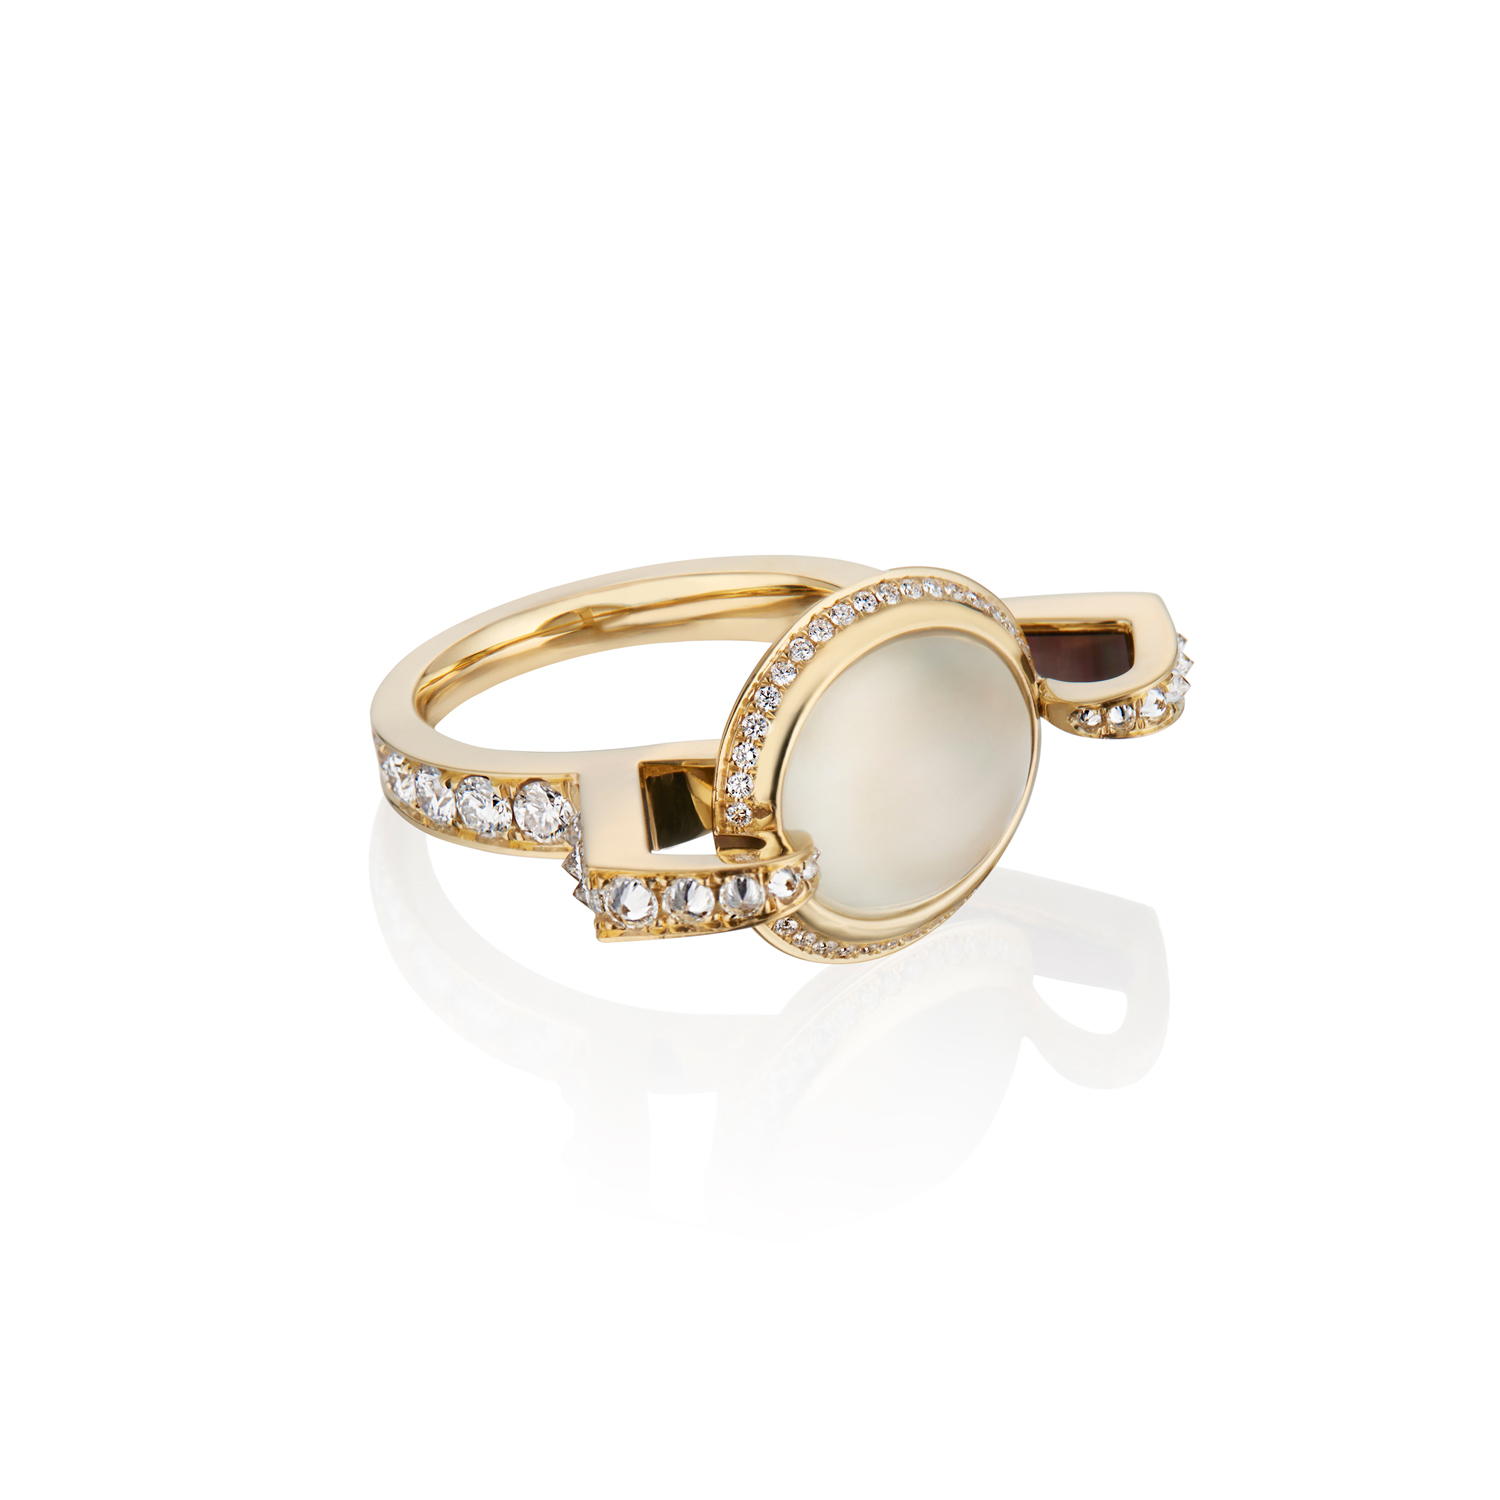 This is a side view of the Renisis Reservoir Ice Ring by artist Sardwell. It is crafted in 18k yellow gold with inverted diamonds and a translucent ice jade center. The diamonds can be clearly seen set around the entire ring.